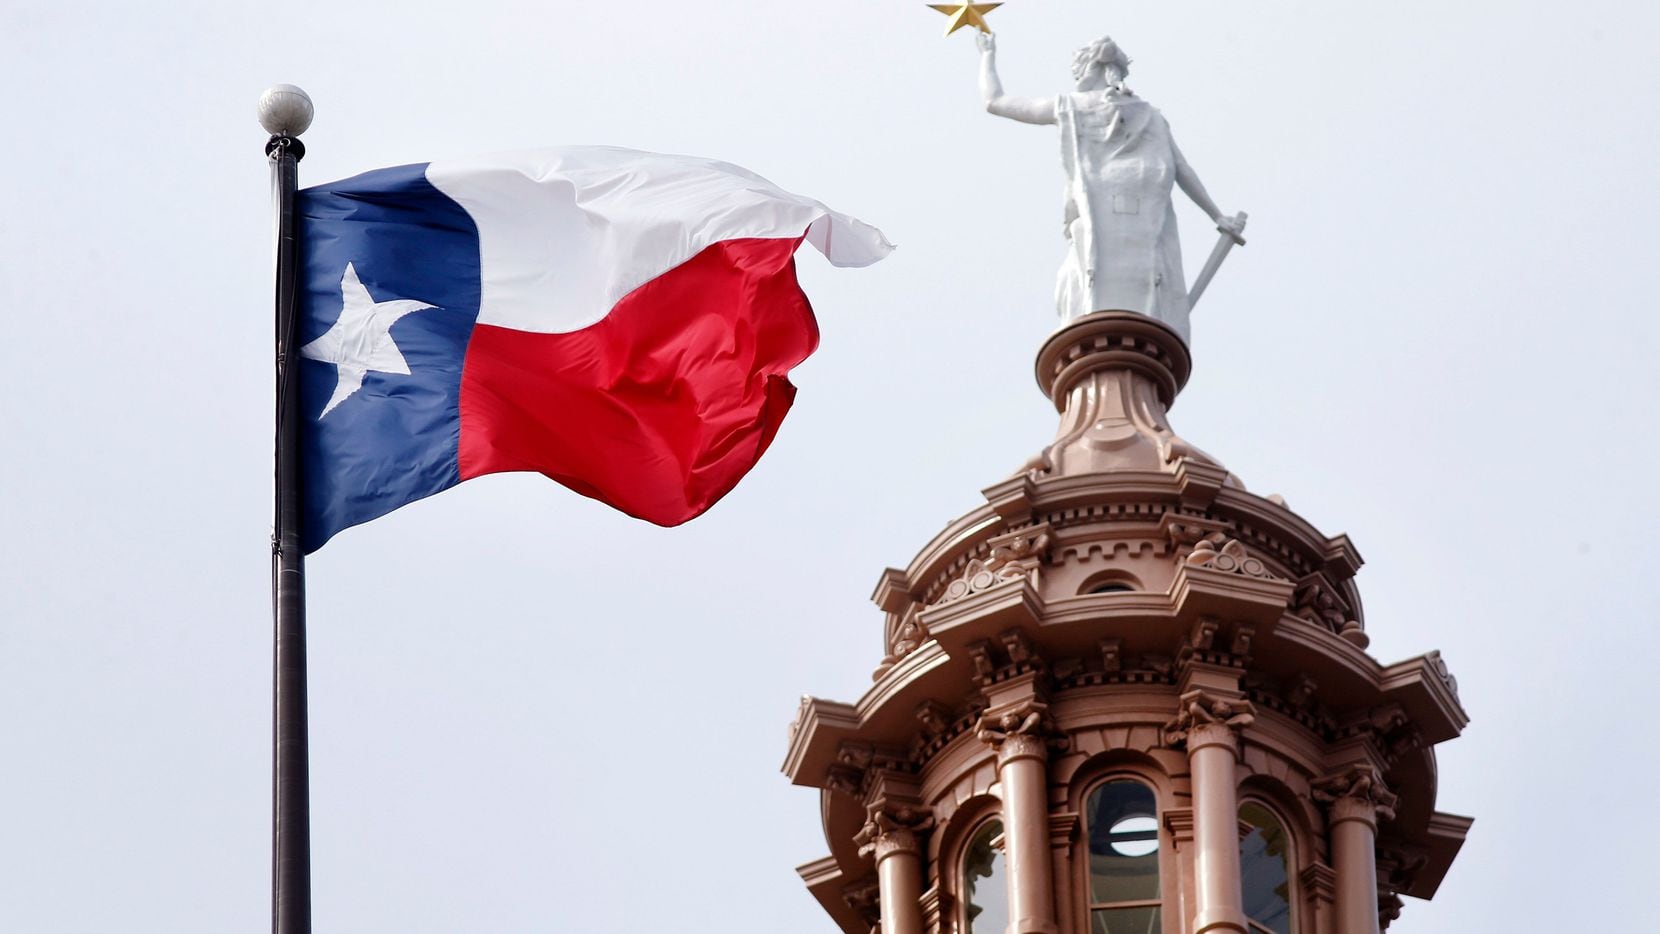 The Texas flag flies over the Texas Capitol in Austin, Texas, Wednesday, May 22, 2019.